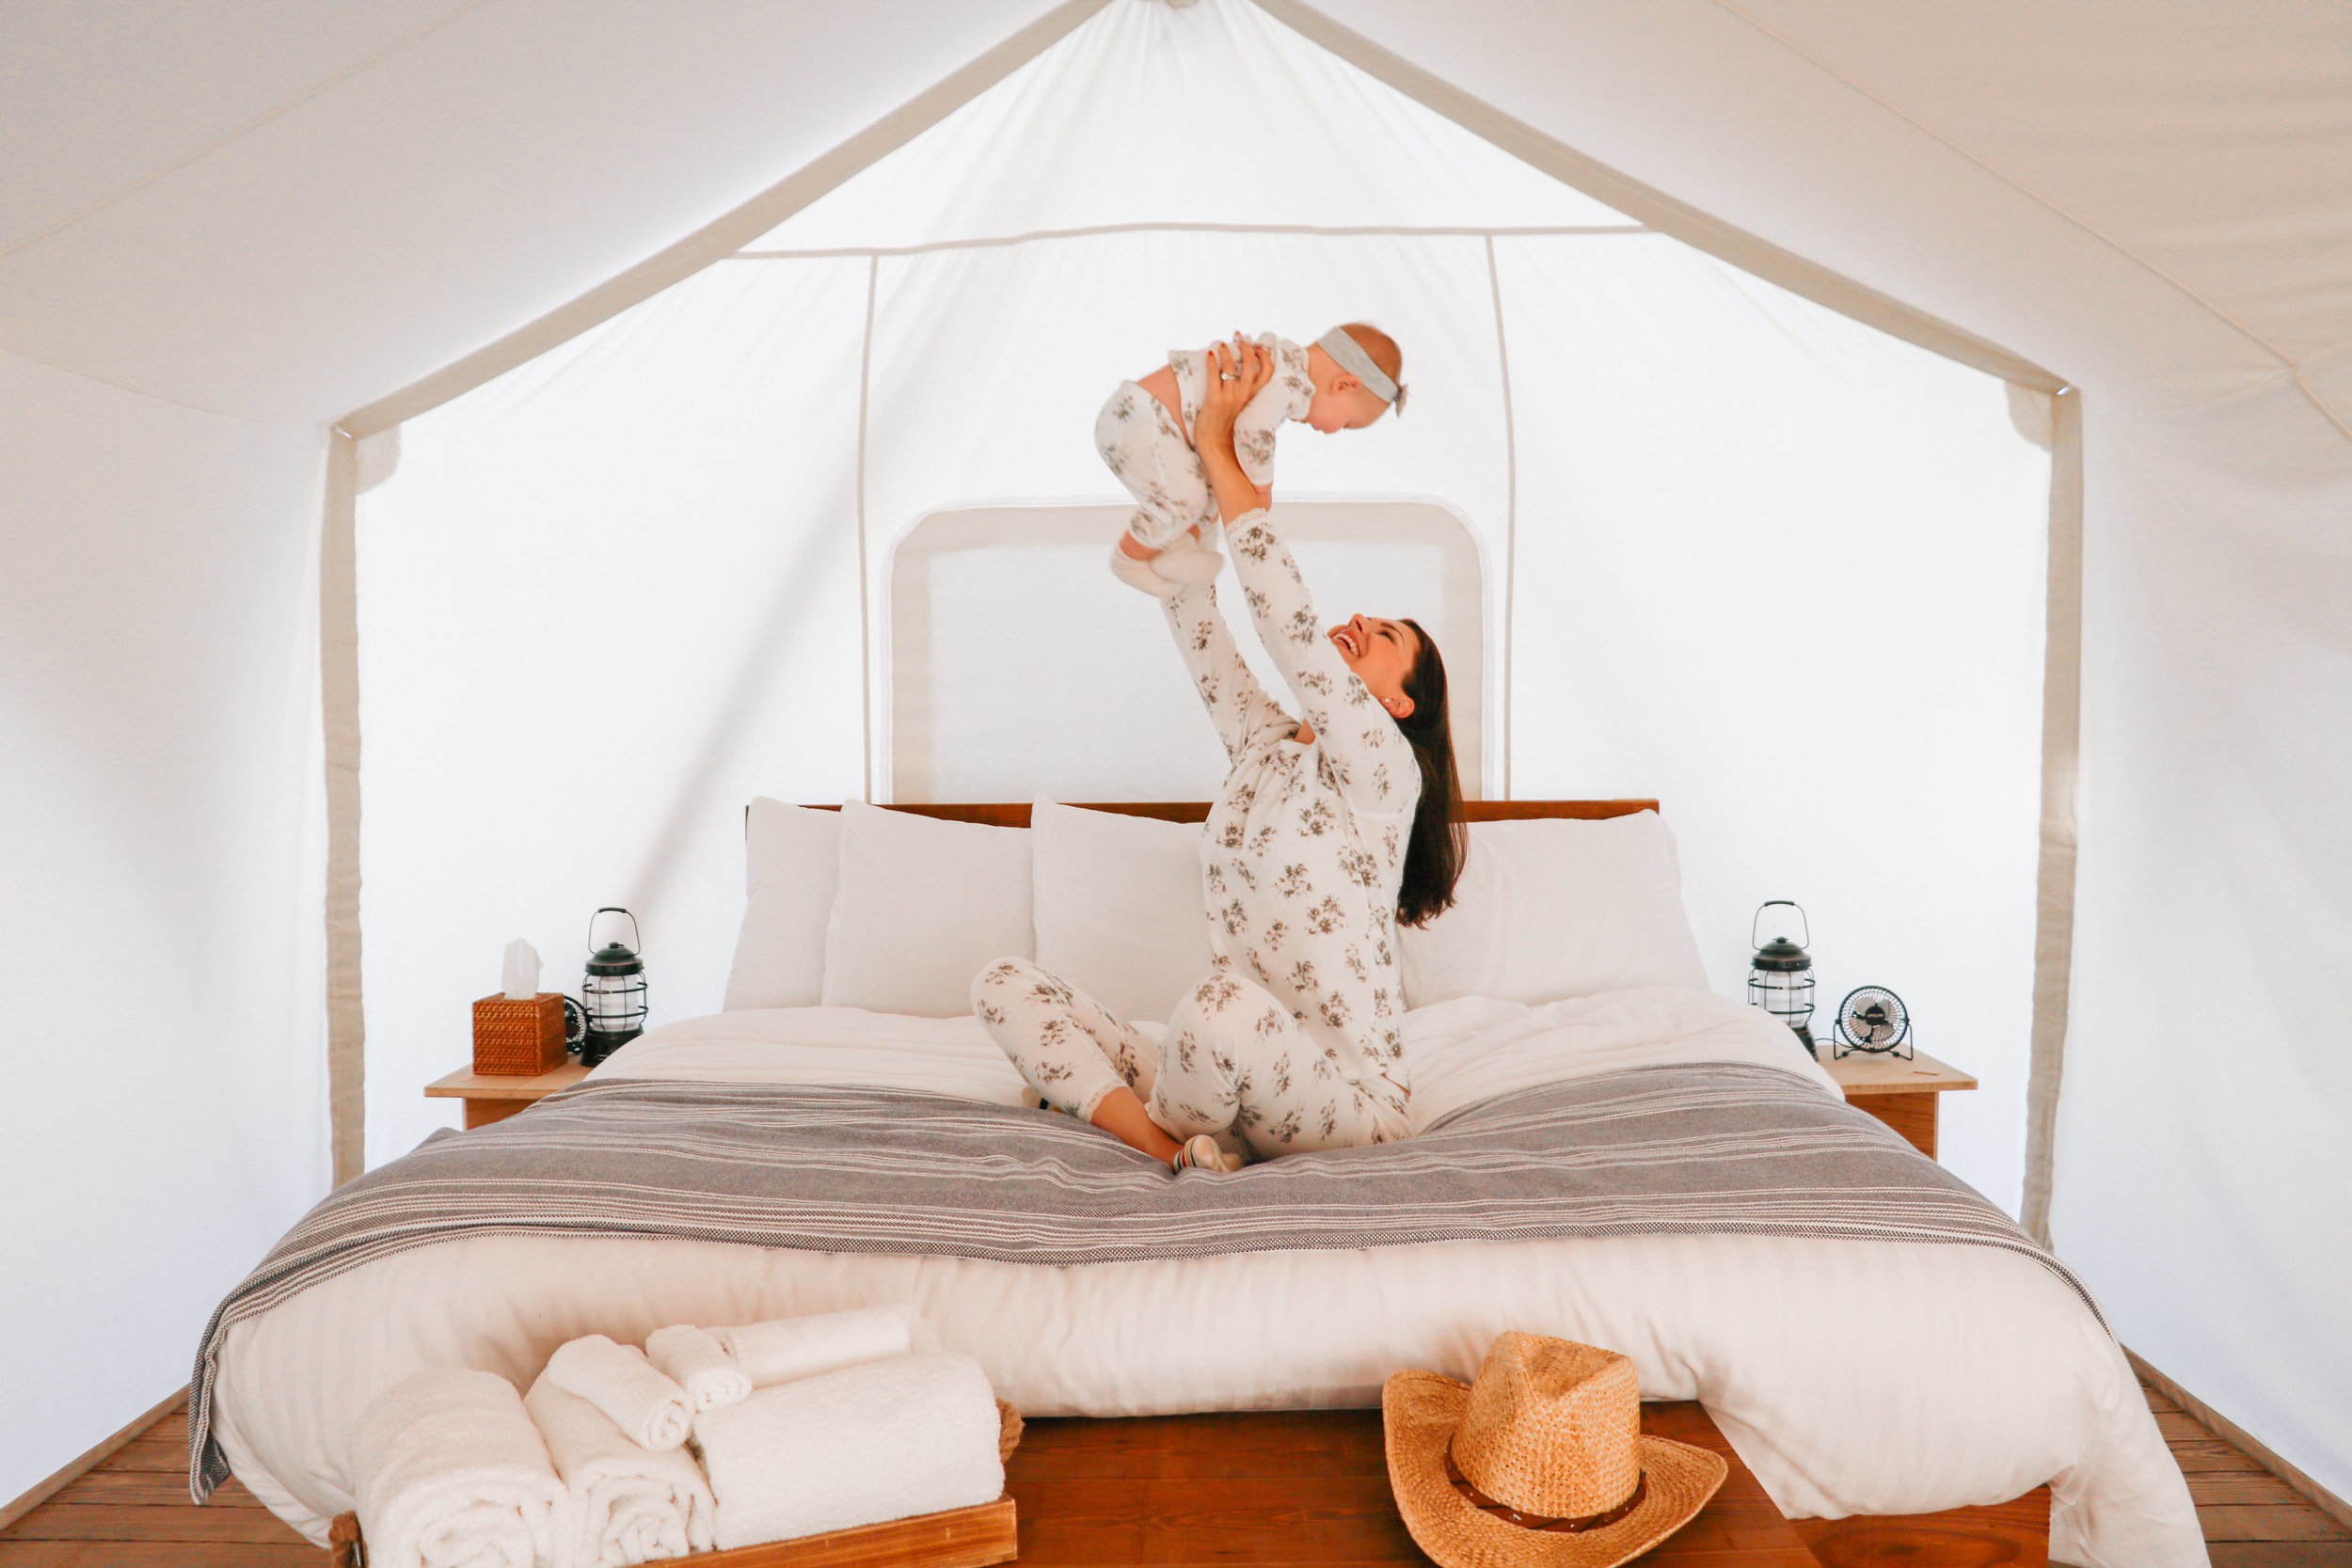 Hotel Spotlight: Glamping at Under Canvas in Yellowstone